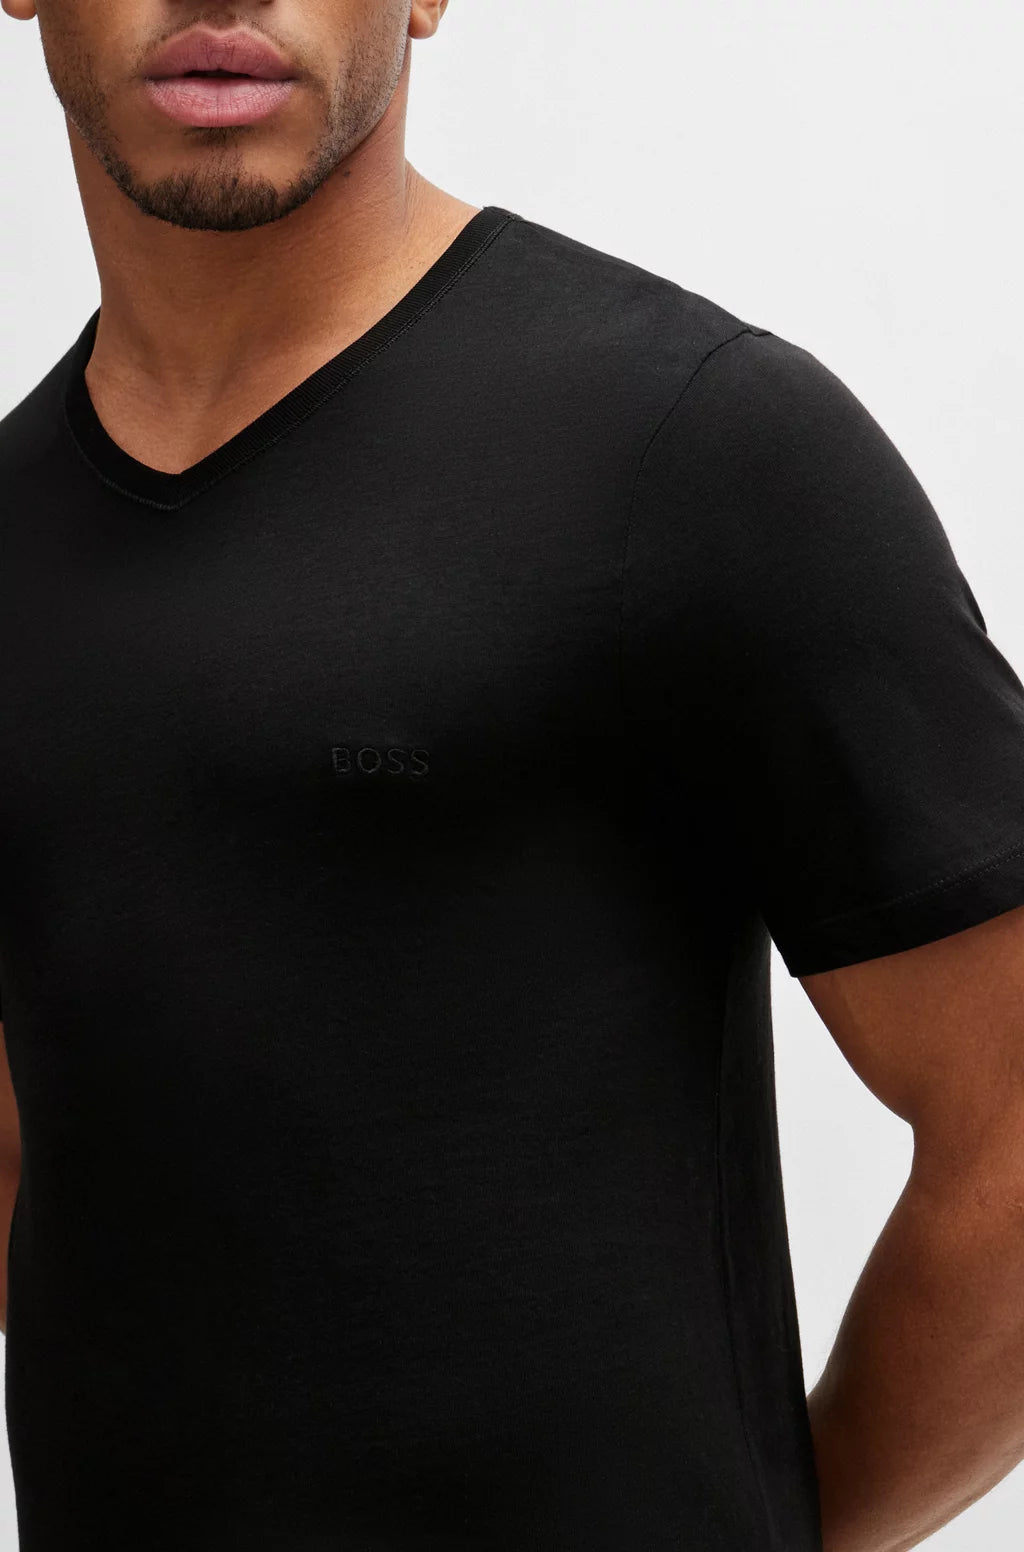 Hugo Boss Three-Pack of V-neck T-shirts in Cotton Jersey - Black